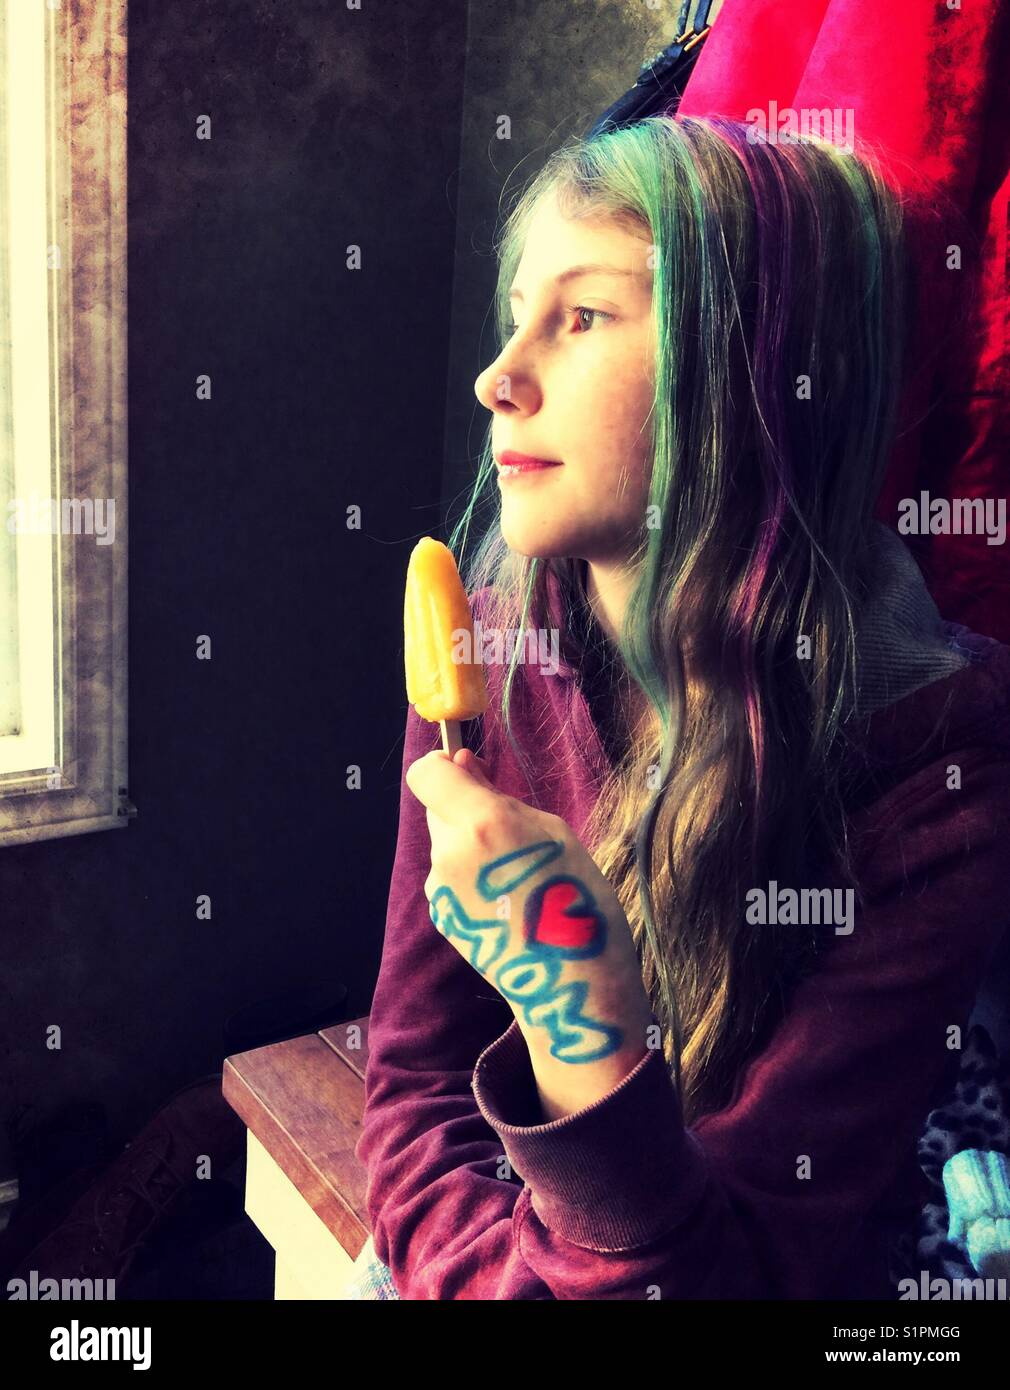 Preteen girl with dyed hair and 'I ❤️MOM' drawn on hand daydreaming by window while holding orange frozen dessert Stock Photo